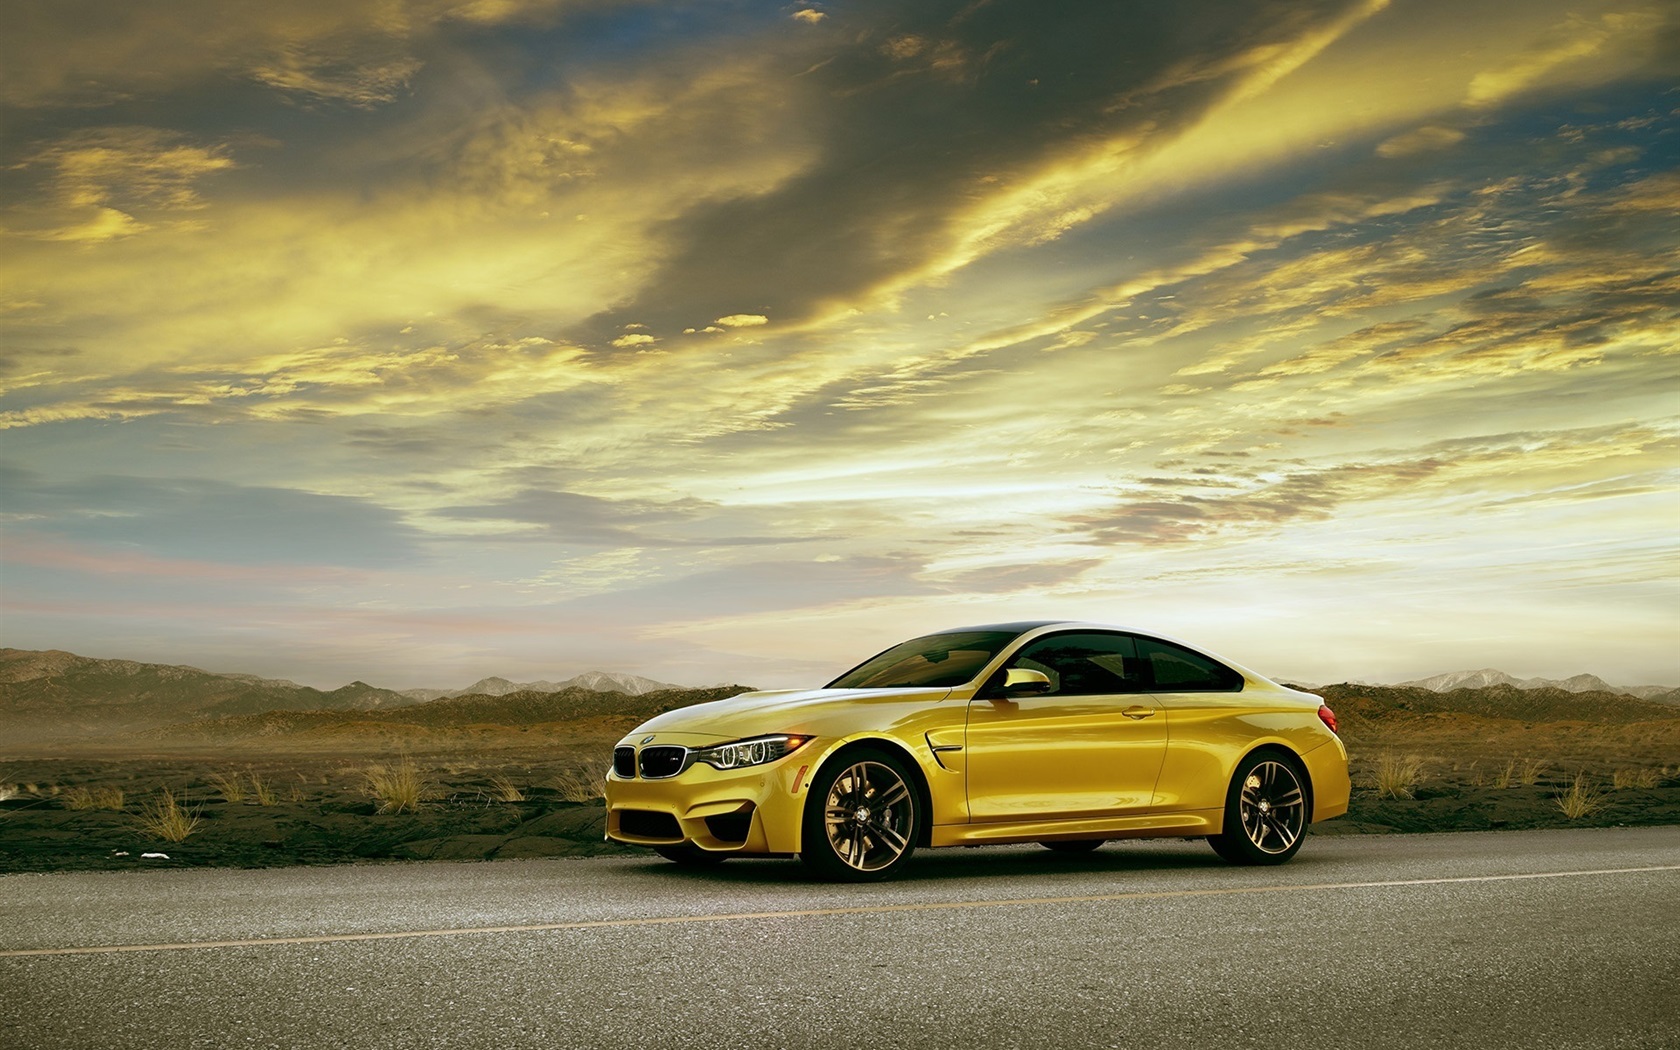 BMW M4 Coupe F82 Yellow Car Side View 640x1136 IPhone 5 5S 5C SE Wallpaper, Background, Picture, Image